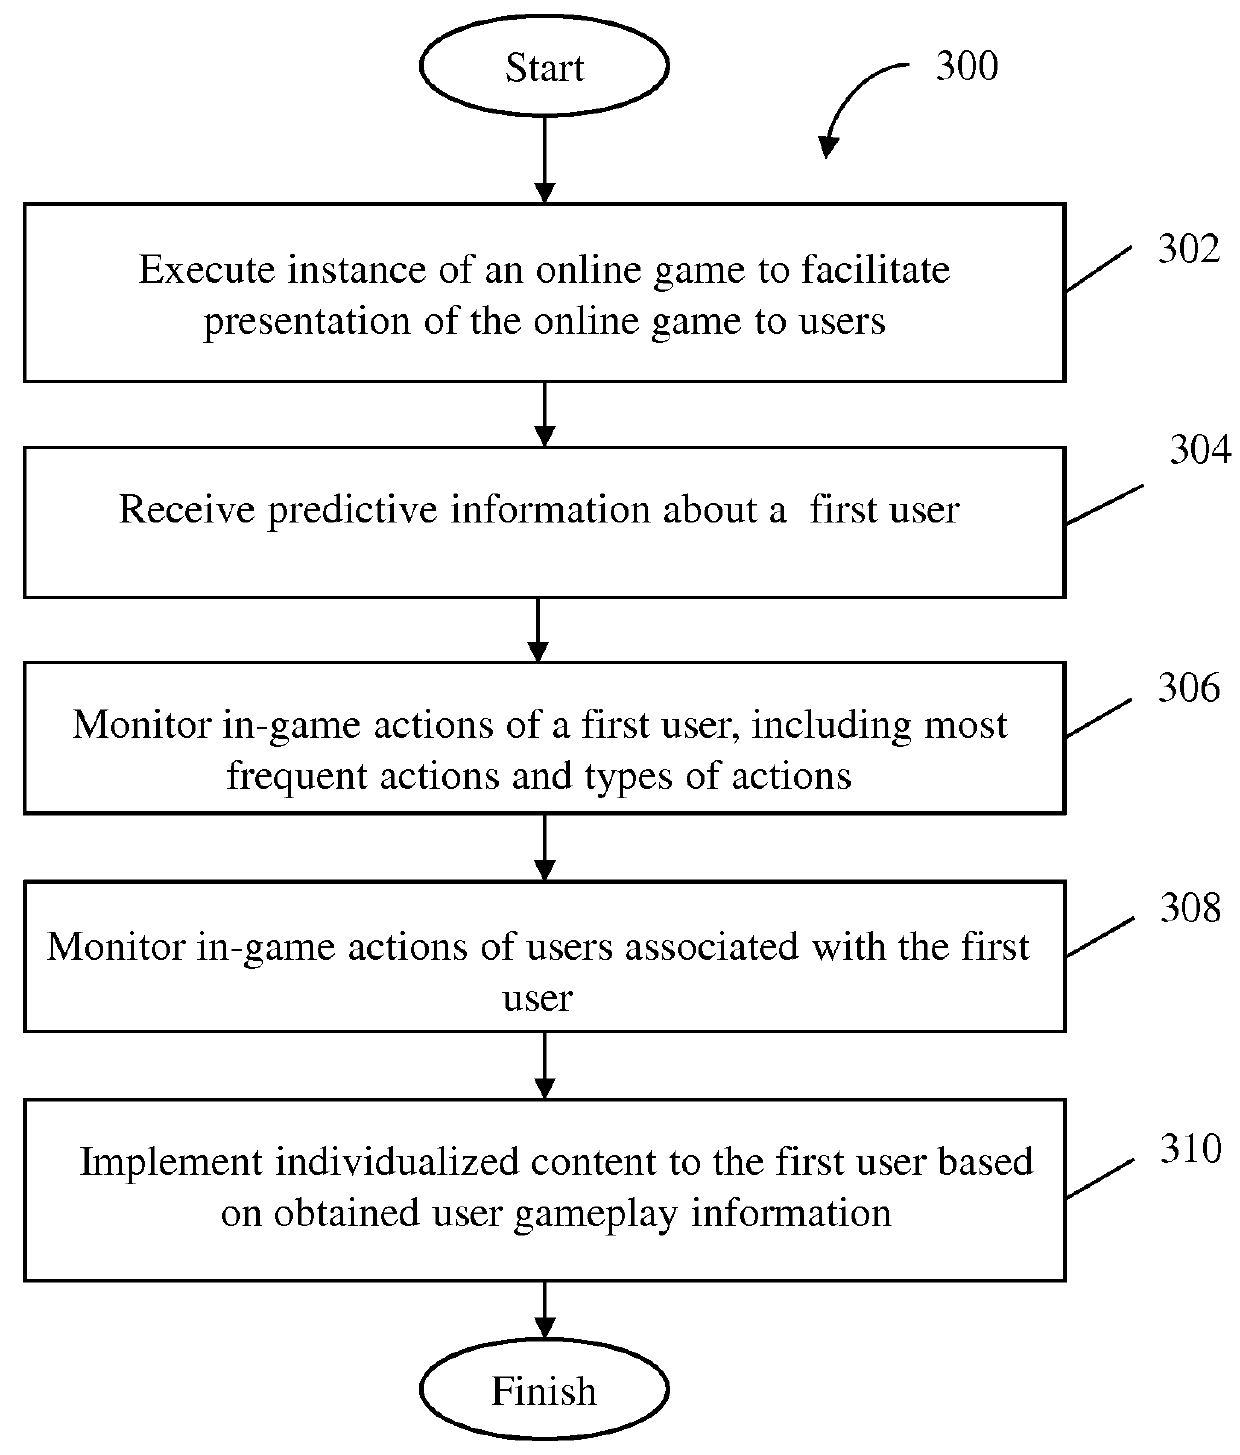 Adjusting individualized content made available to users of an online game based on user gameplay information